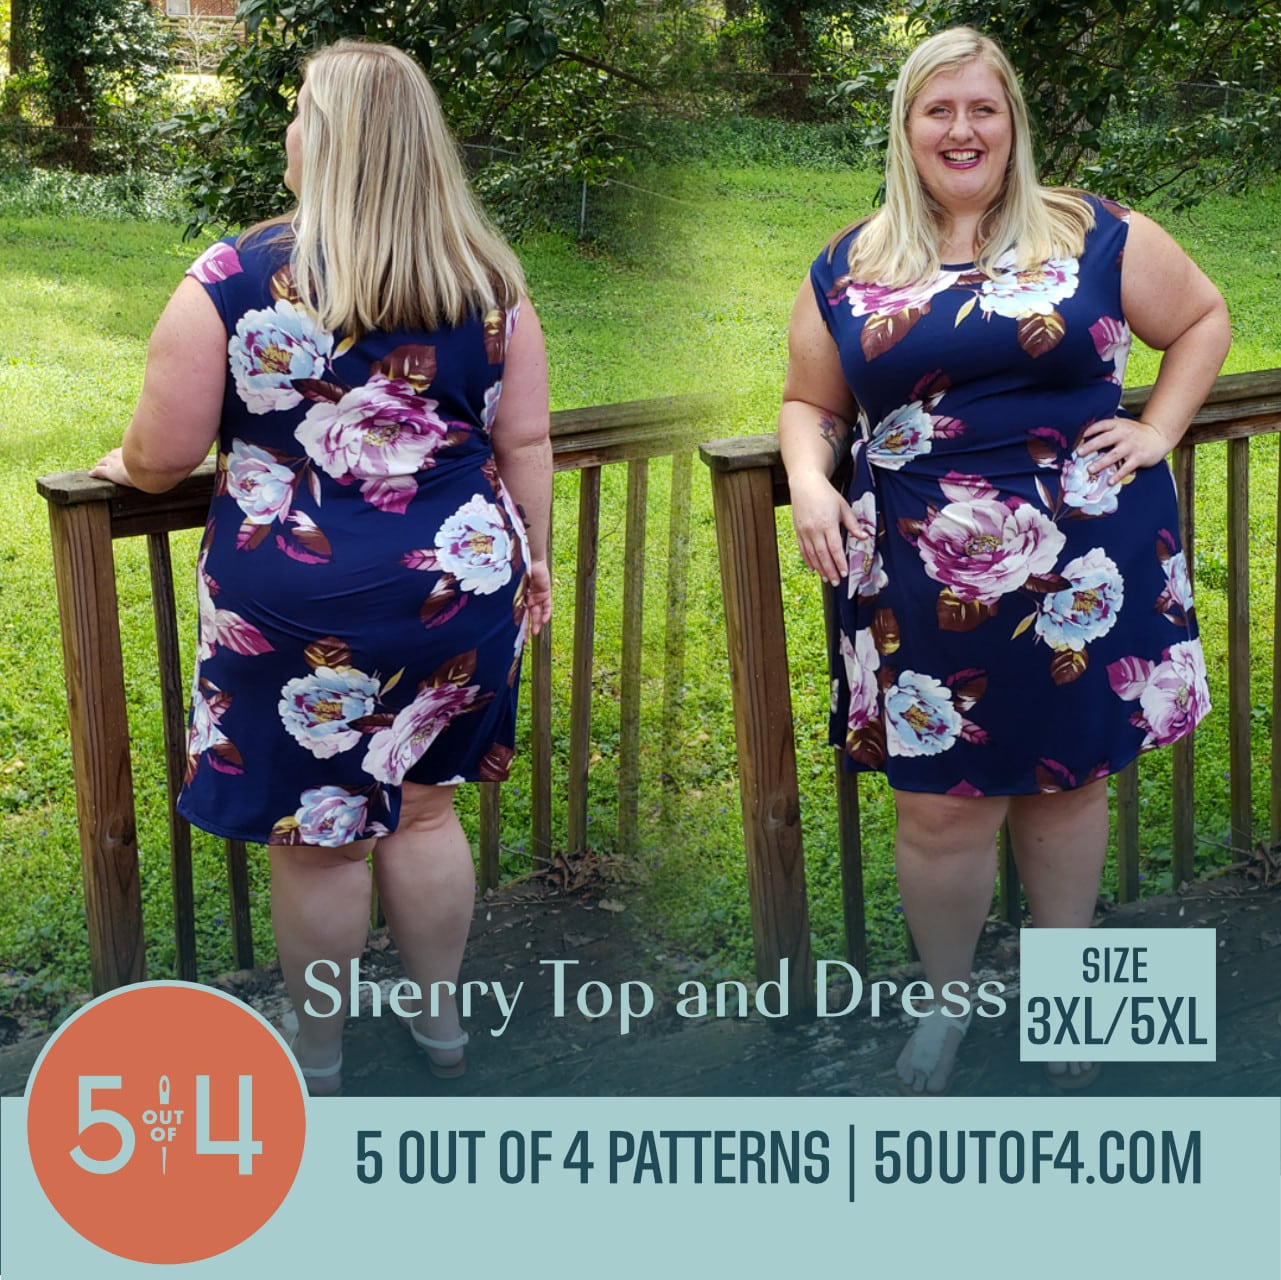 Sherry Top and Dress - 5 out of 4 Patterns